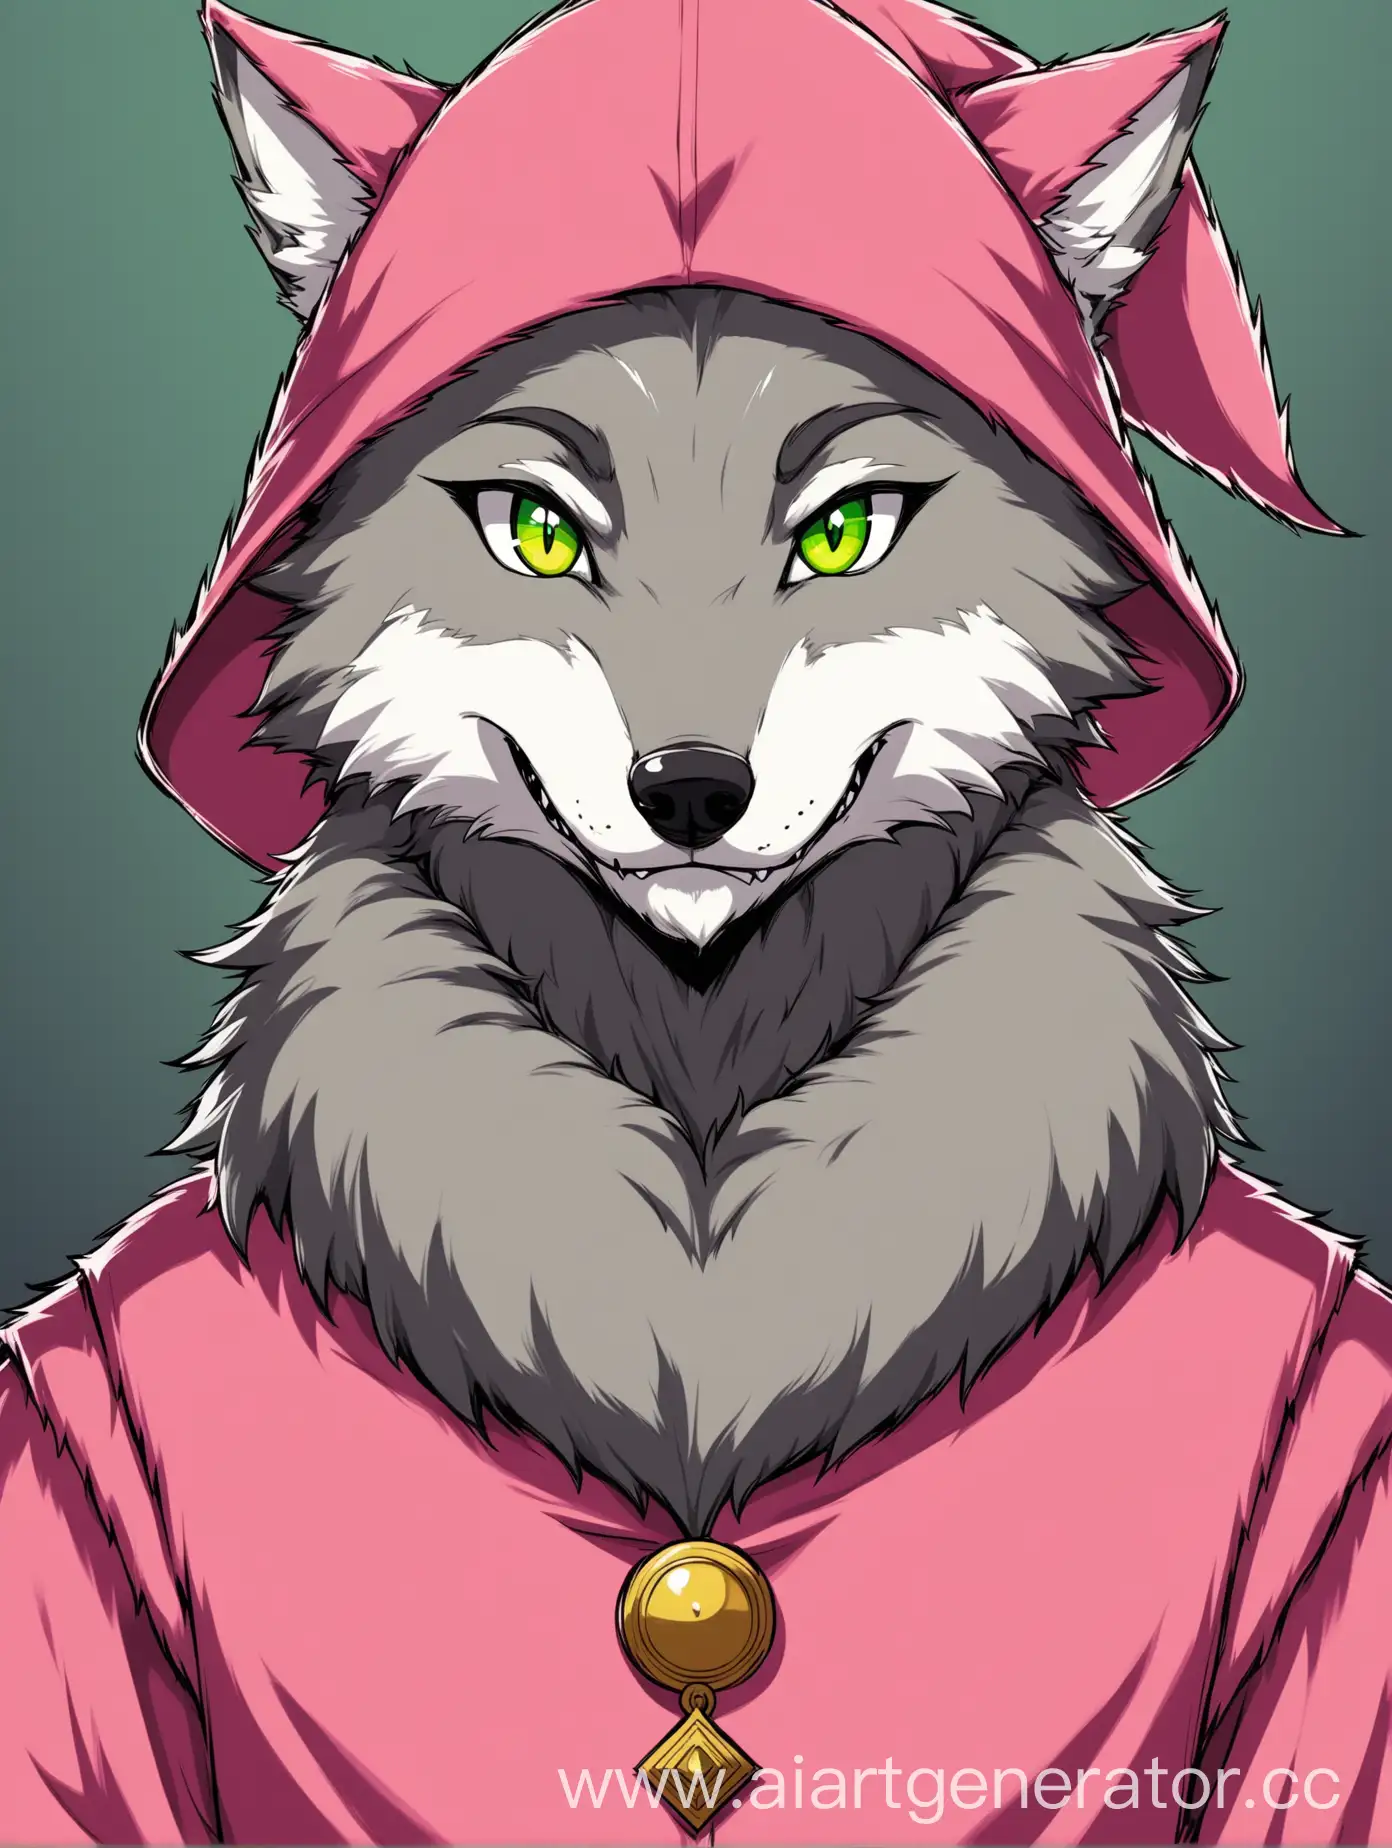 digital art, anime style, anthro wolf, male, big bad wolf from the cartoon, pink medieval dress, pink medieval hat, grey fur, yellow-green eyes, neutral, cunning face.